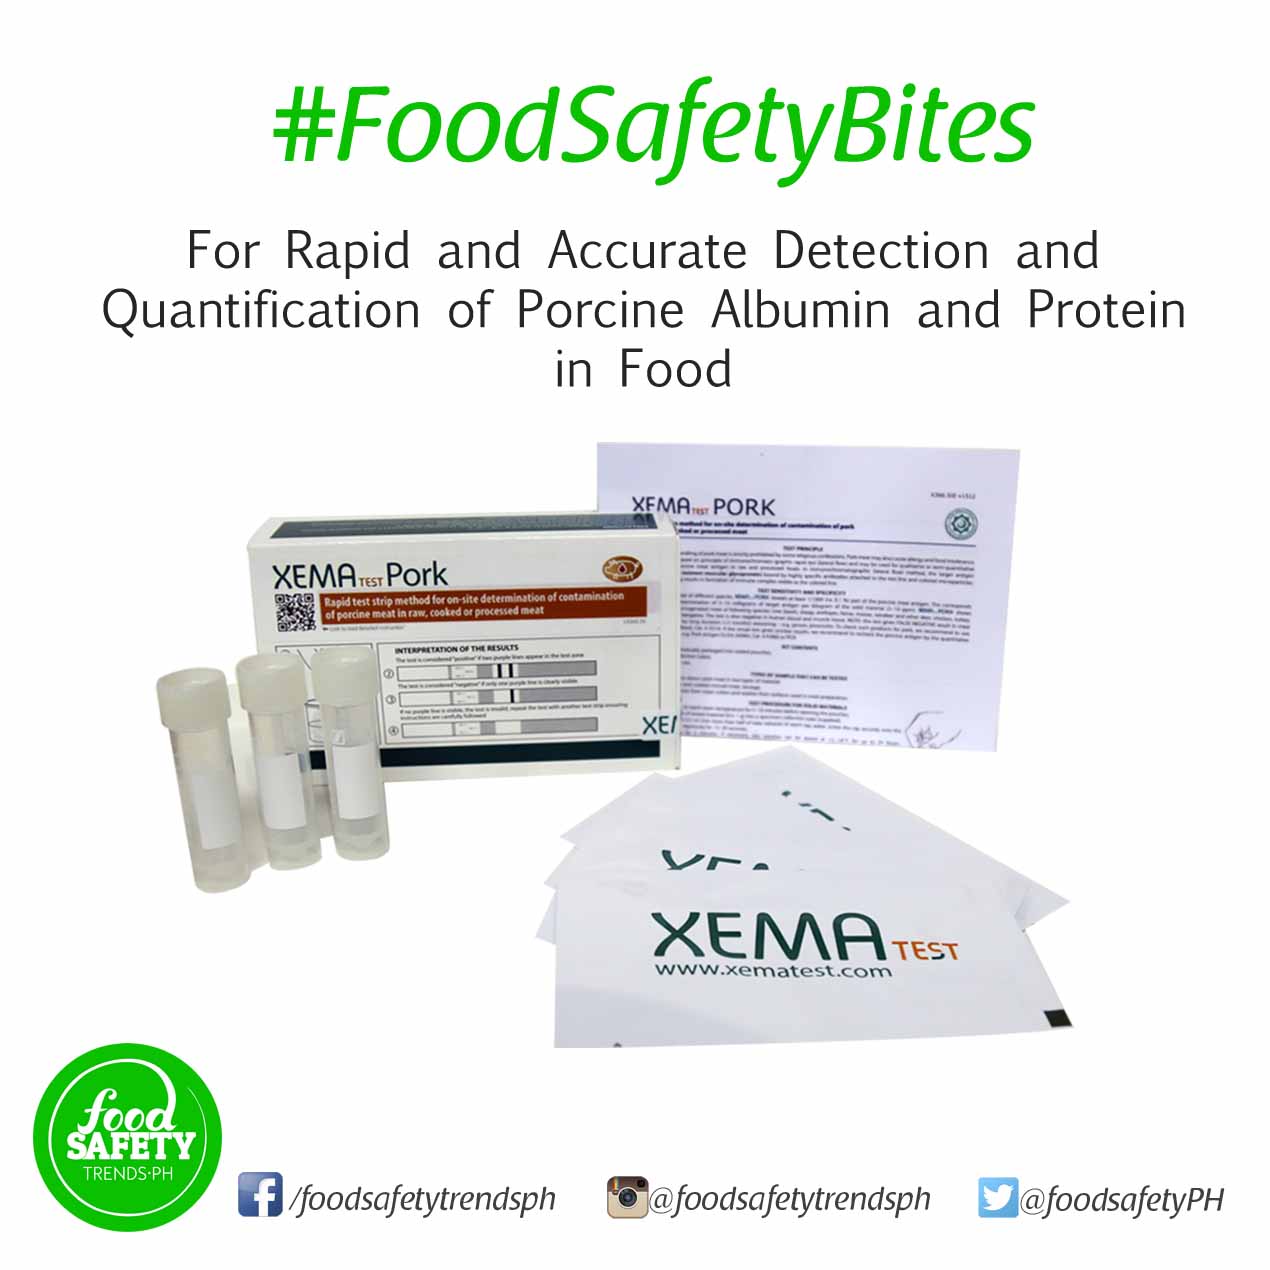 For Rapid and Accurate Detection and Quantification of Porcine Albumin and Protein in Food